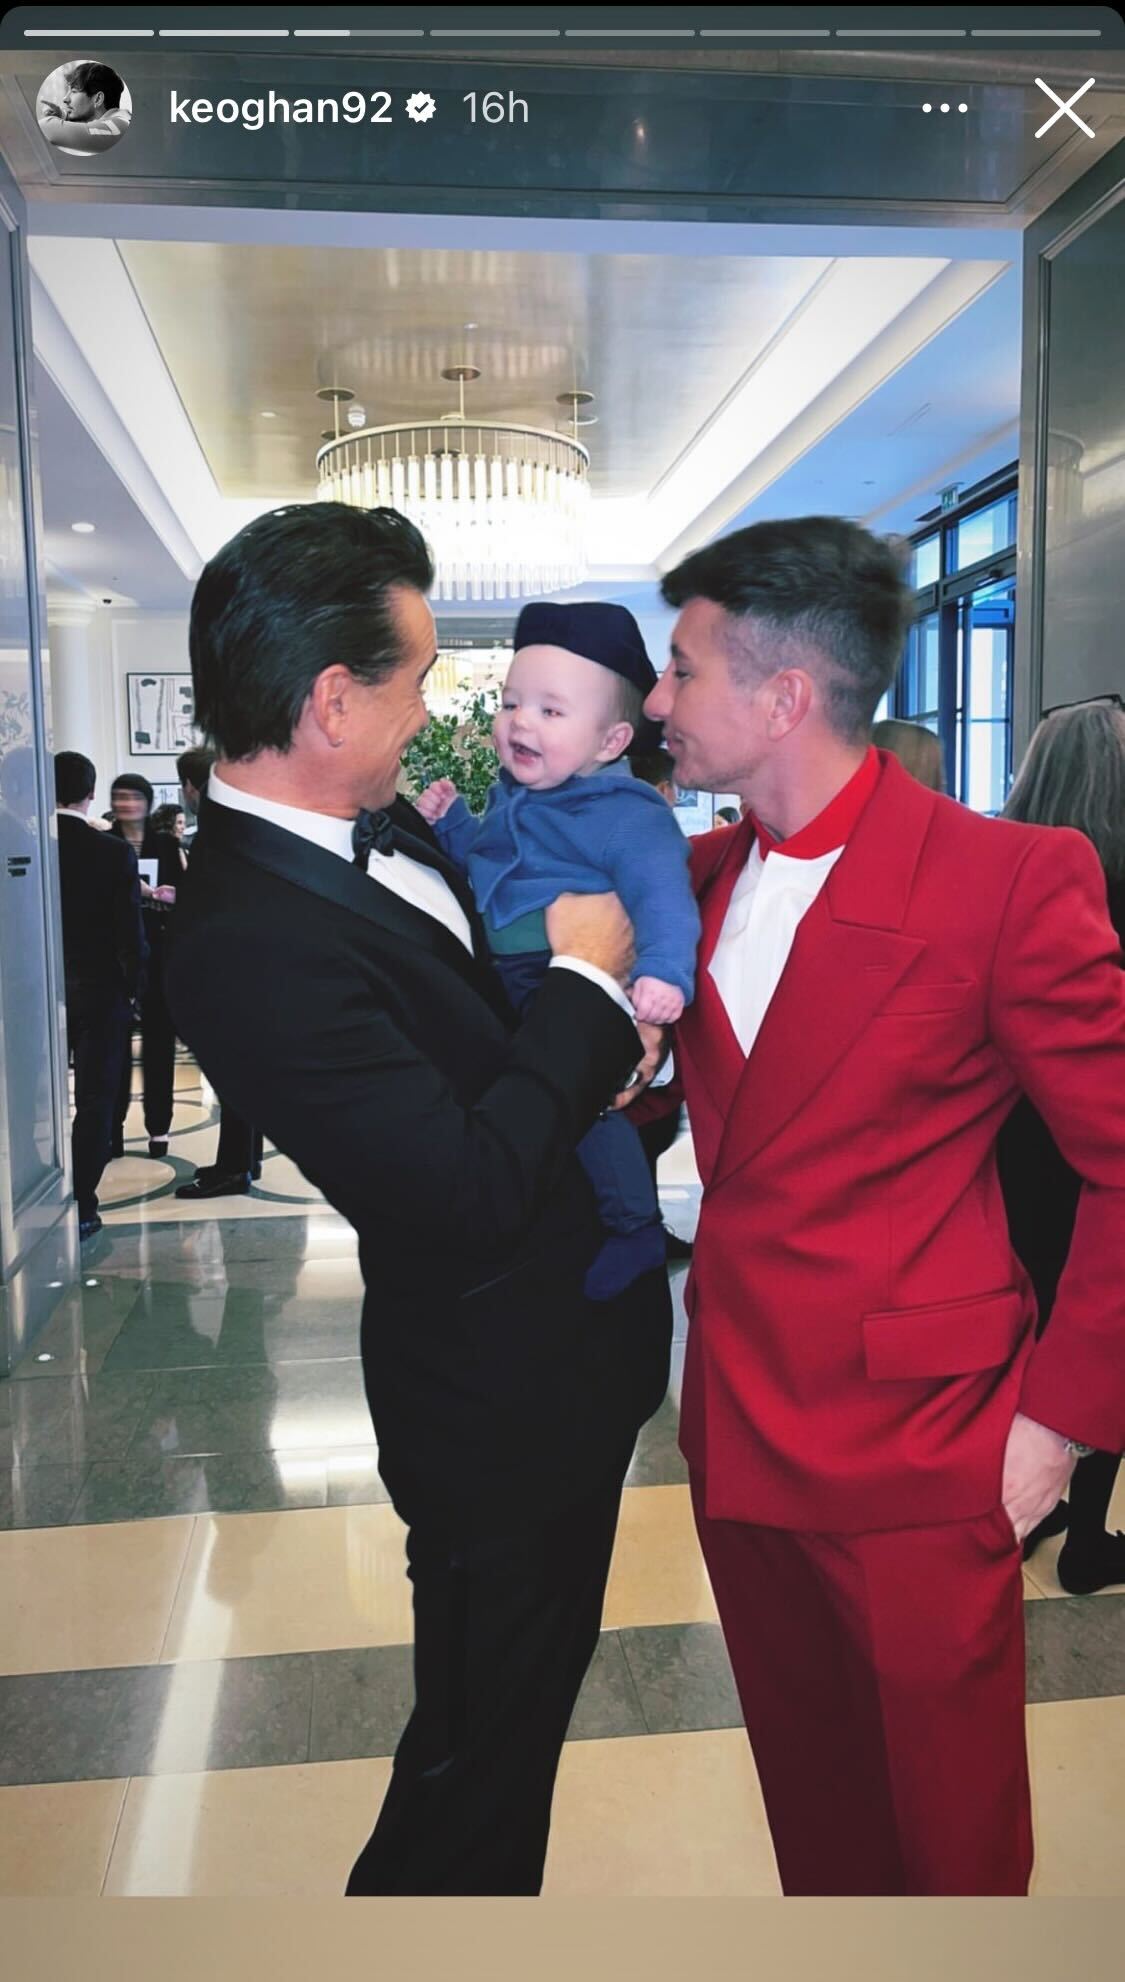 Colin Farrell (left) and Barry Keoghan look at Keoghan’s baby son Brando as he laughs